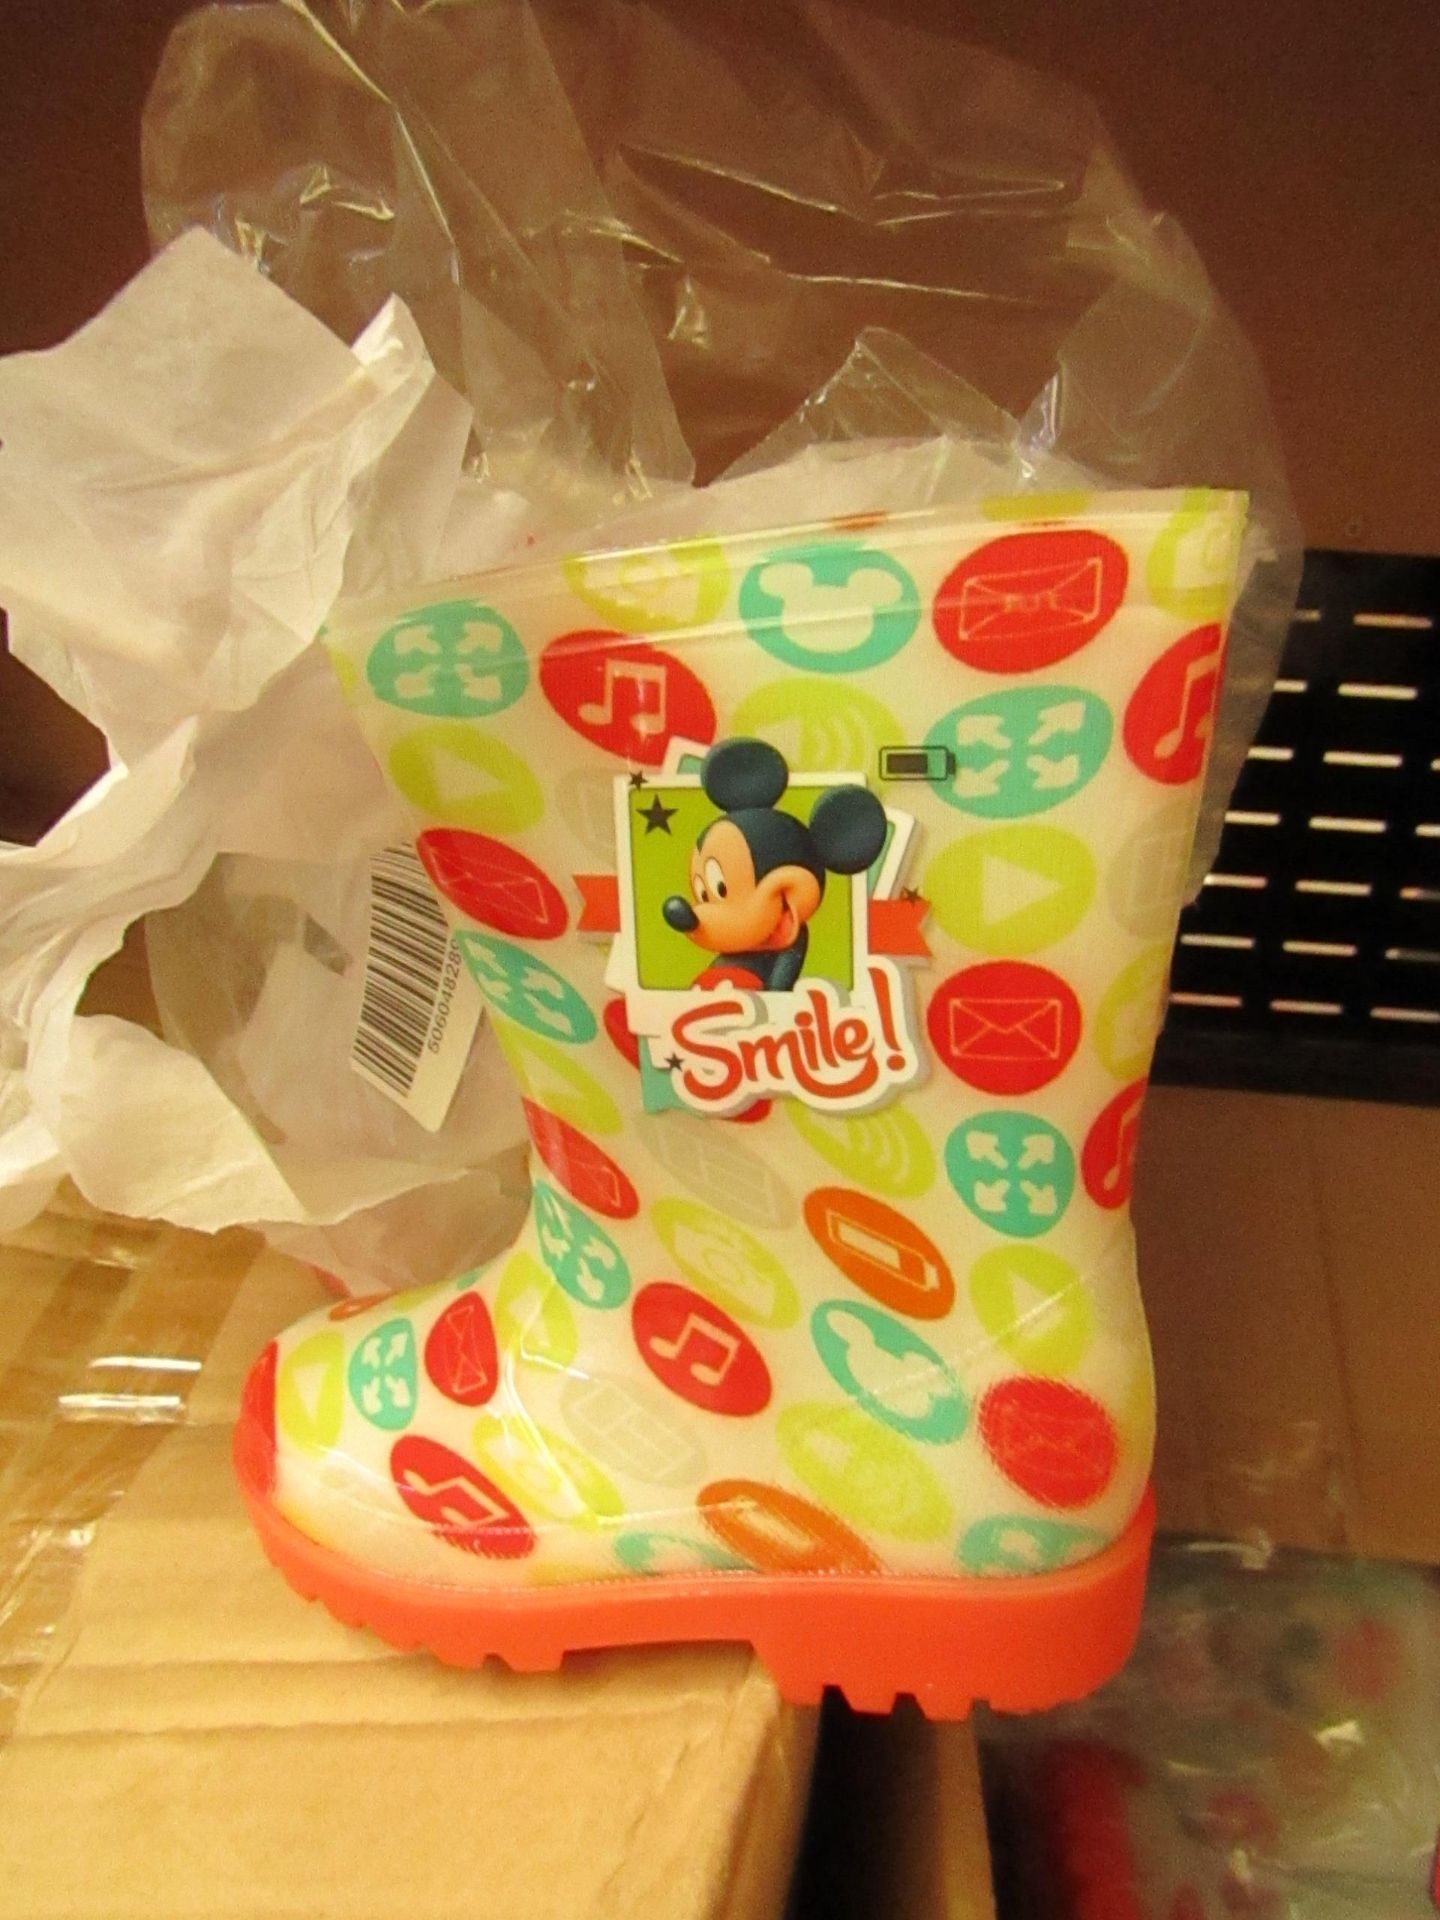 1x Disney Mickey Mouse Wellies - Size 24/25, with Tags - Unused & Packaged